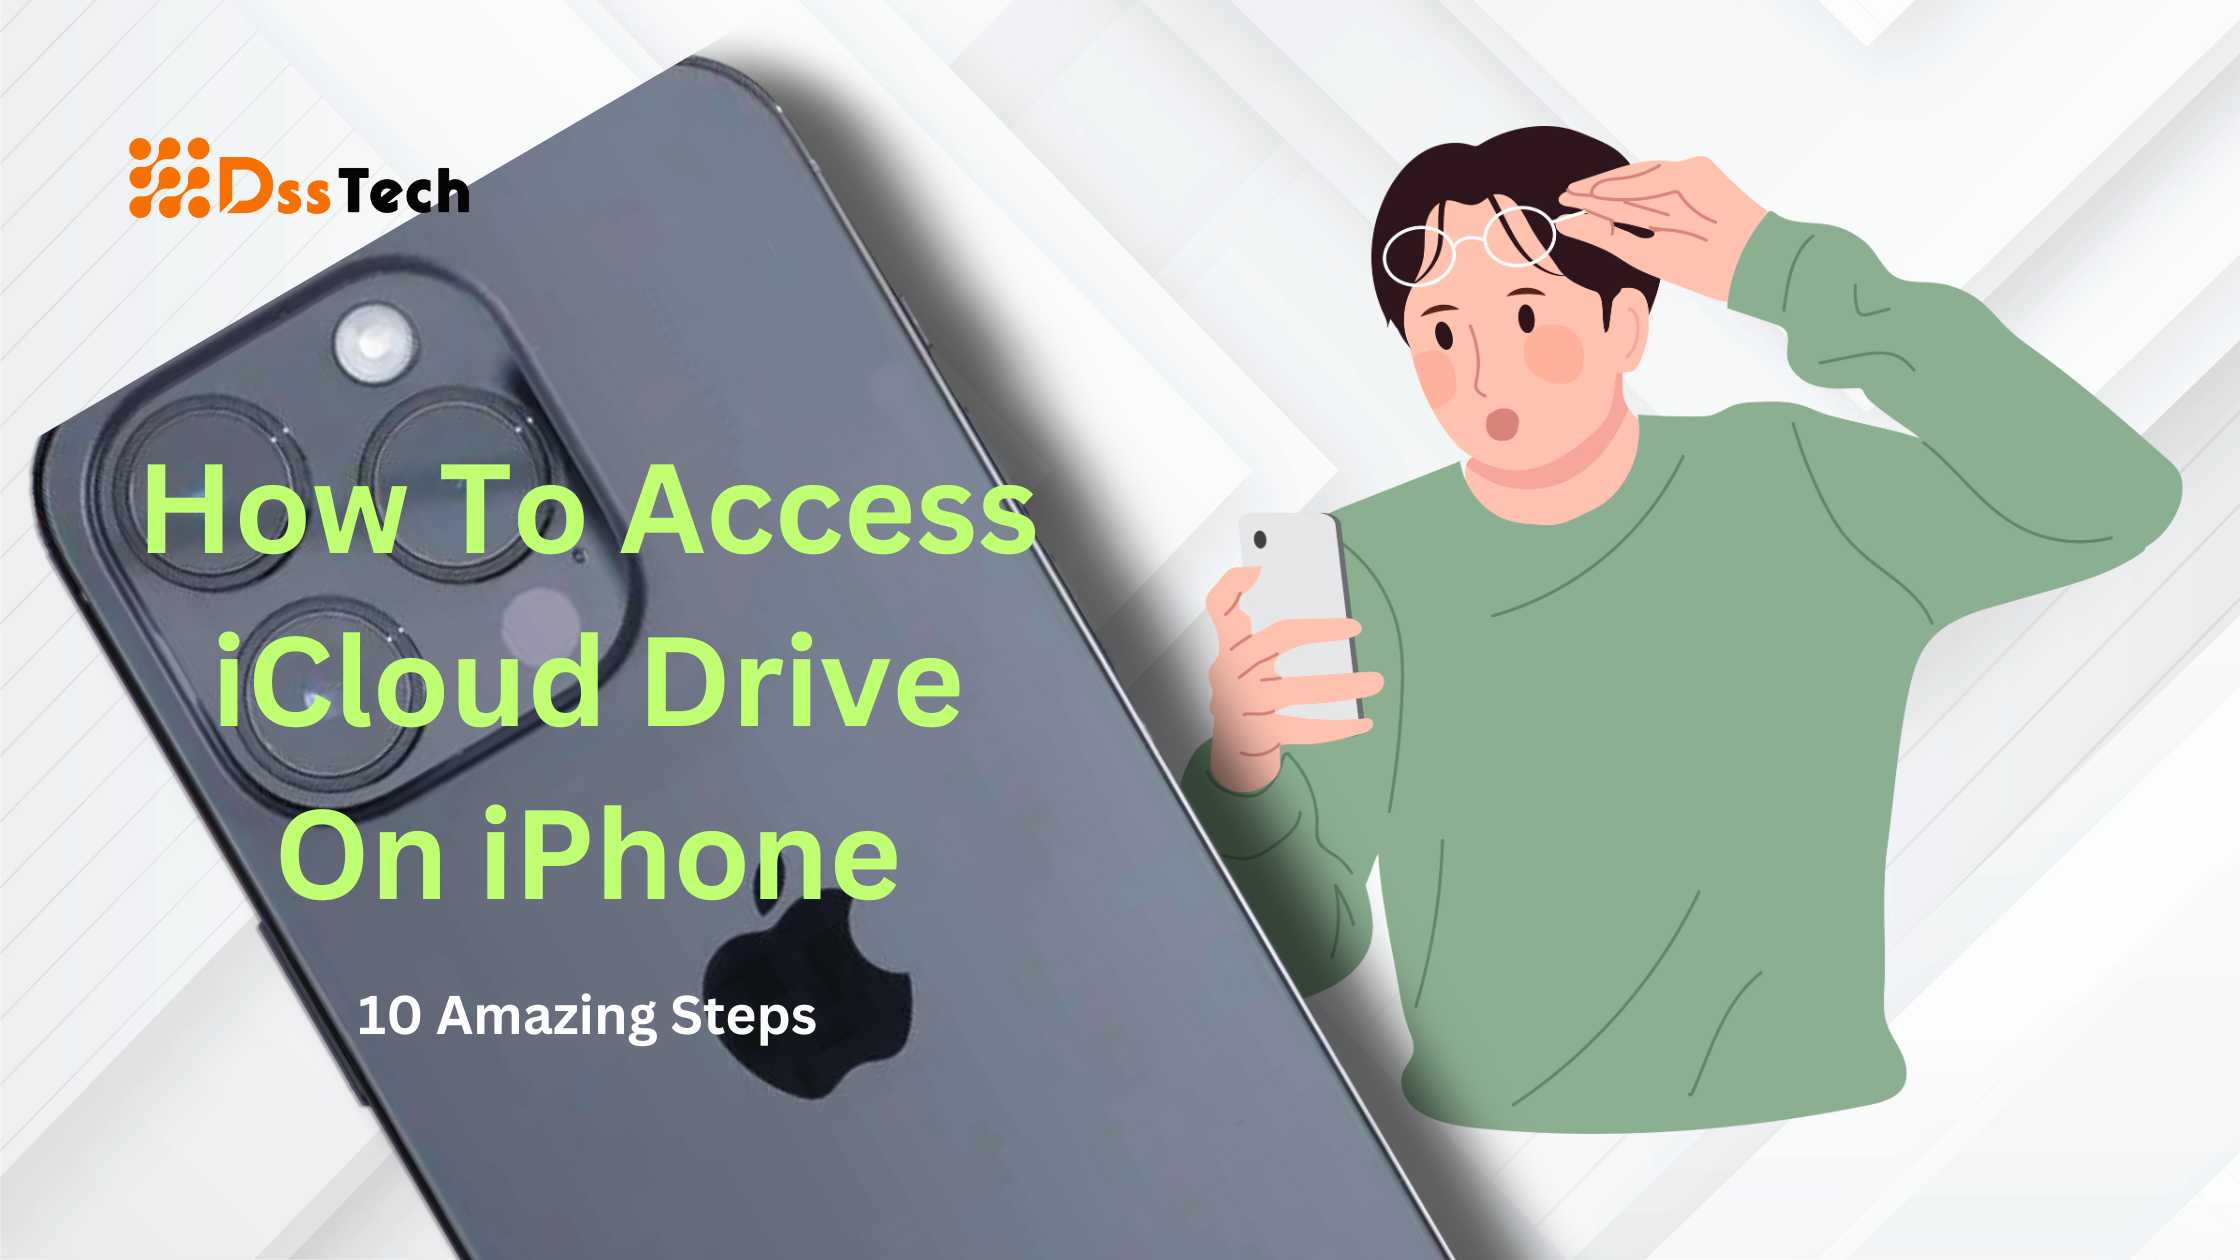 How To Access iCloud Drive On iPhone